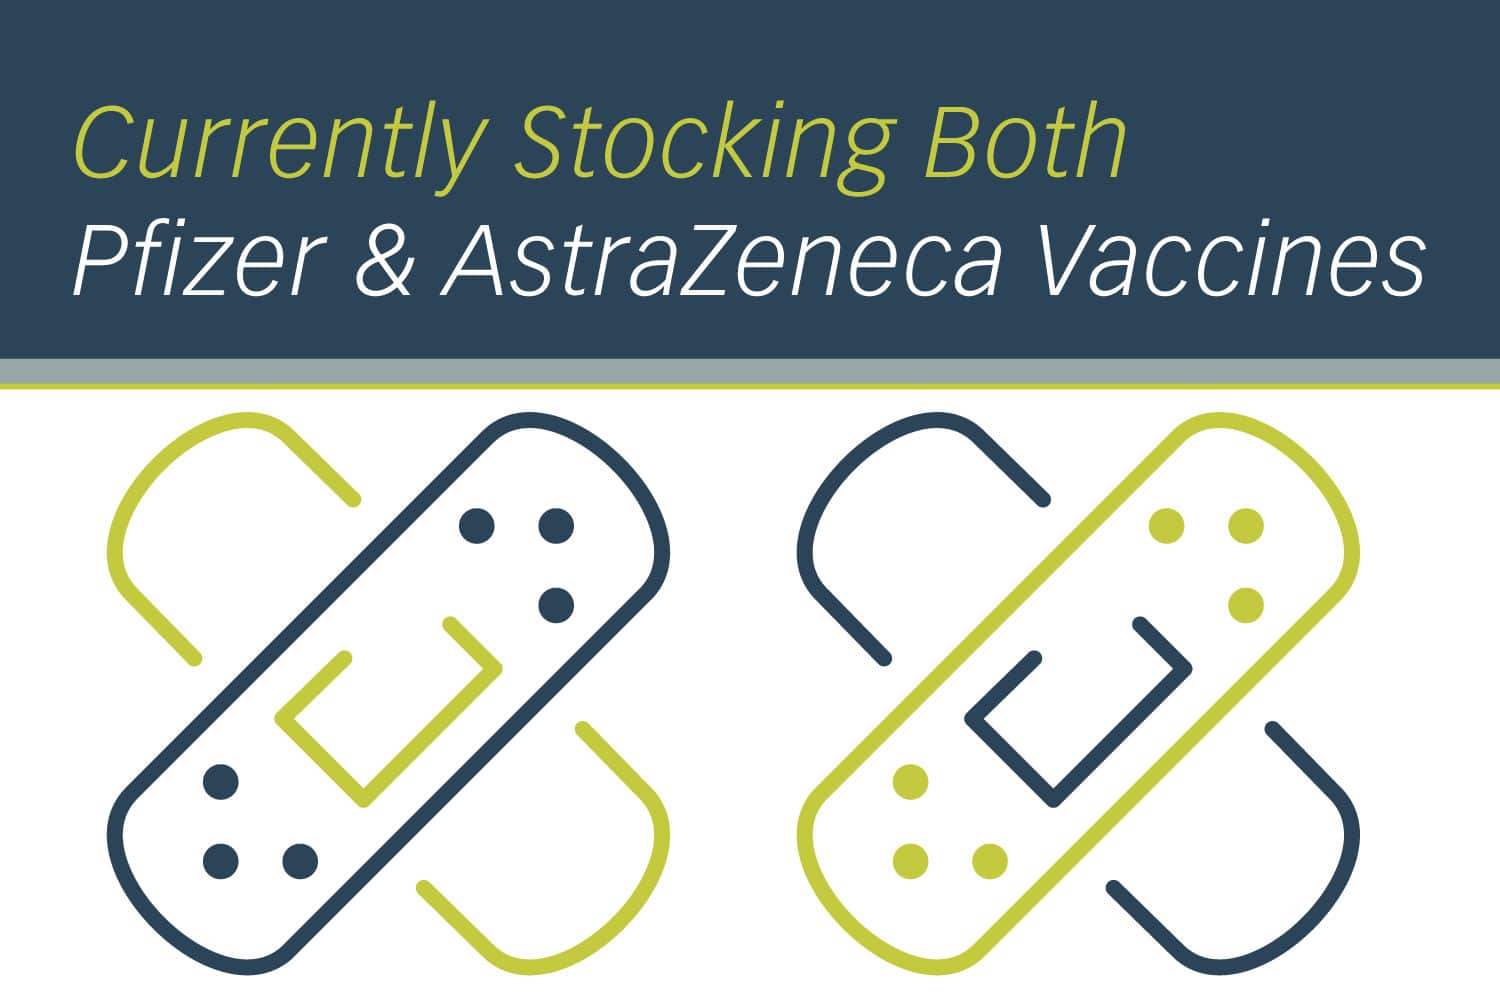 medical centre tuggeranong - doctors greenway - gp south canberra kambah, wanniassa, isabella plains - currently stocking both pfizer & astrazeneca vaccines